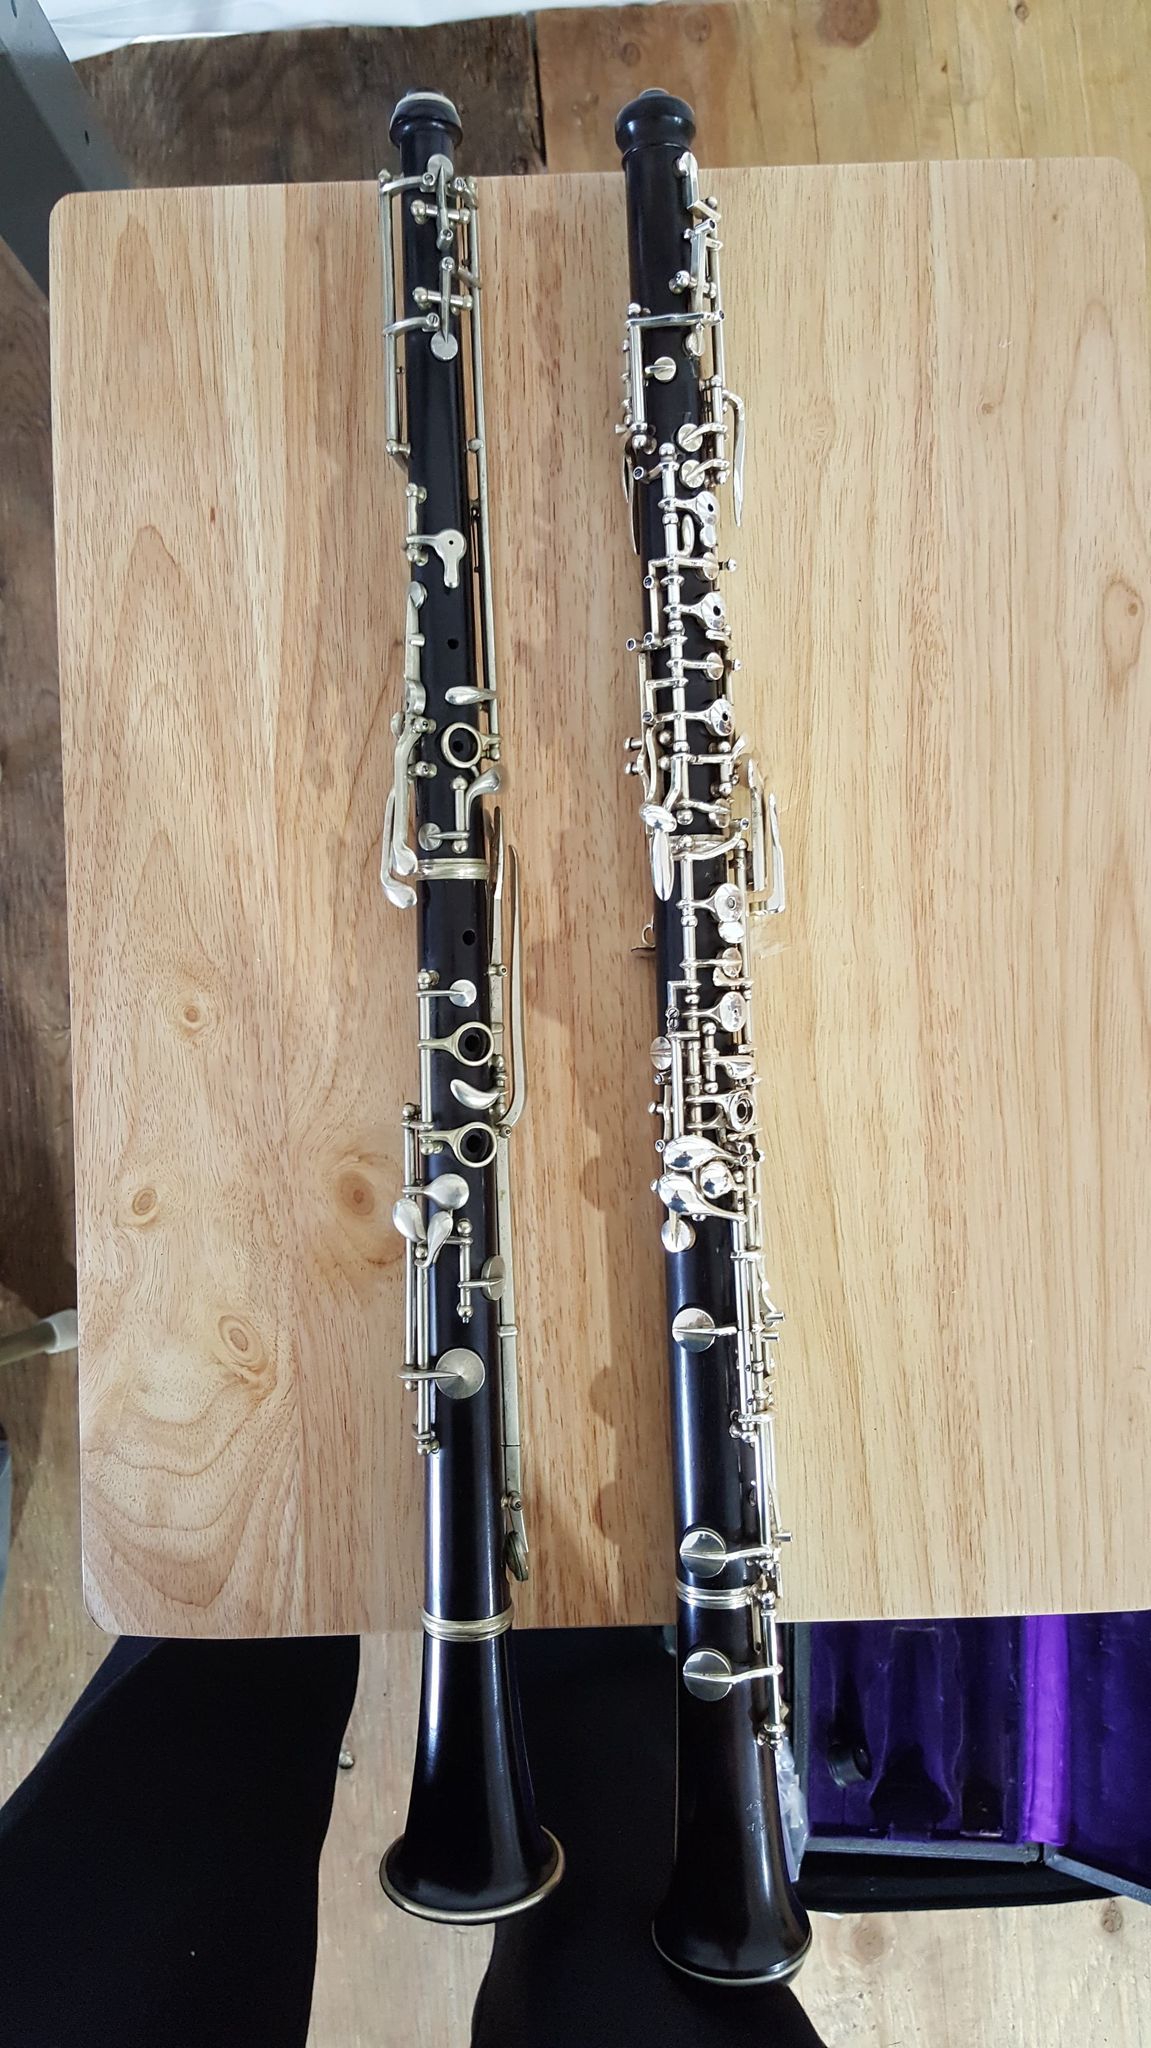 Two clarinets on a table

Description automatically generated with low confidence